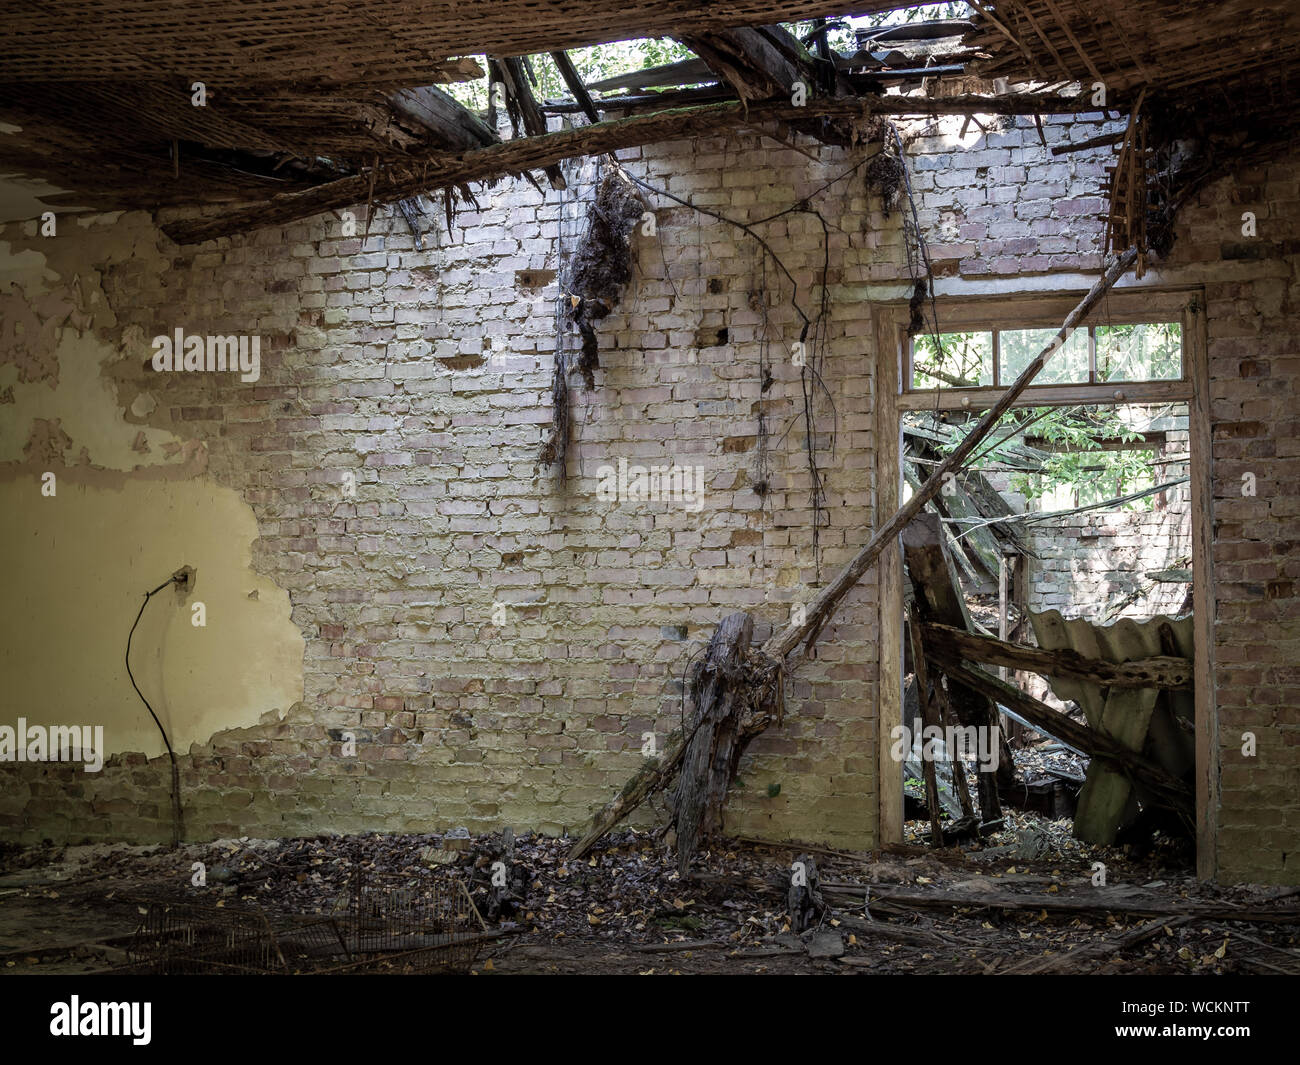 Abandoned looted grocery store in Zalissya village in Chernobyl Exclusion Zone, Ukraine Stock Photo